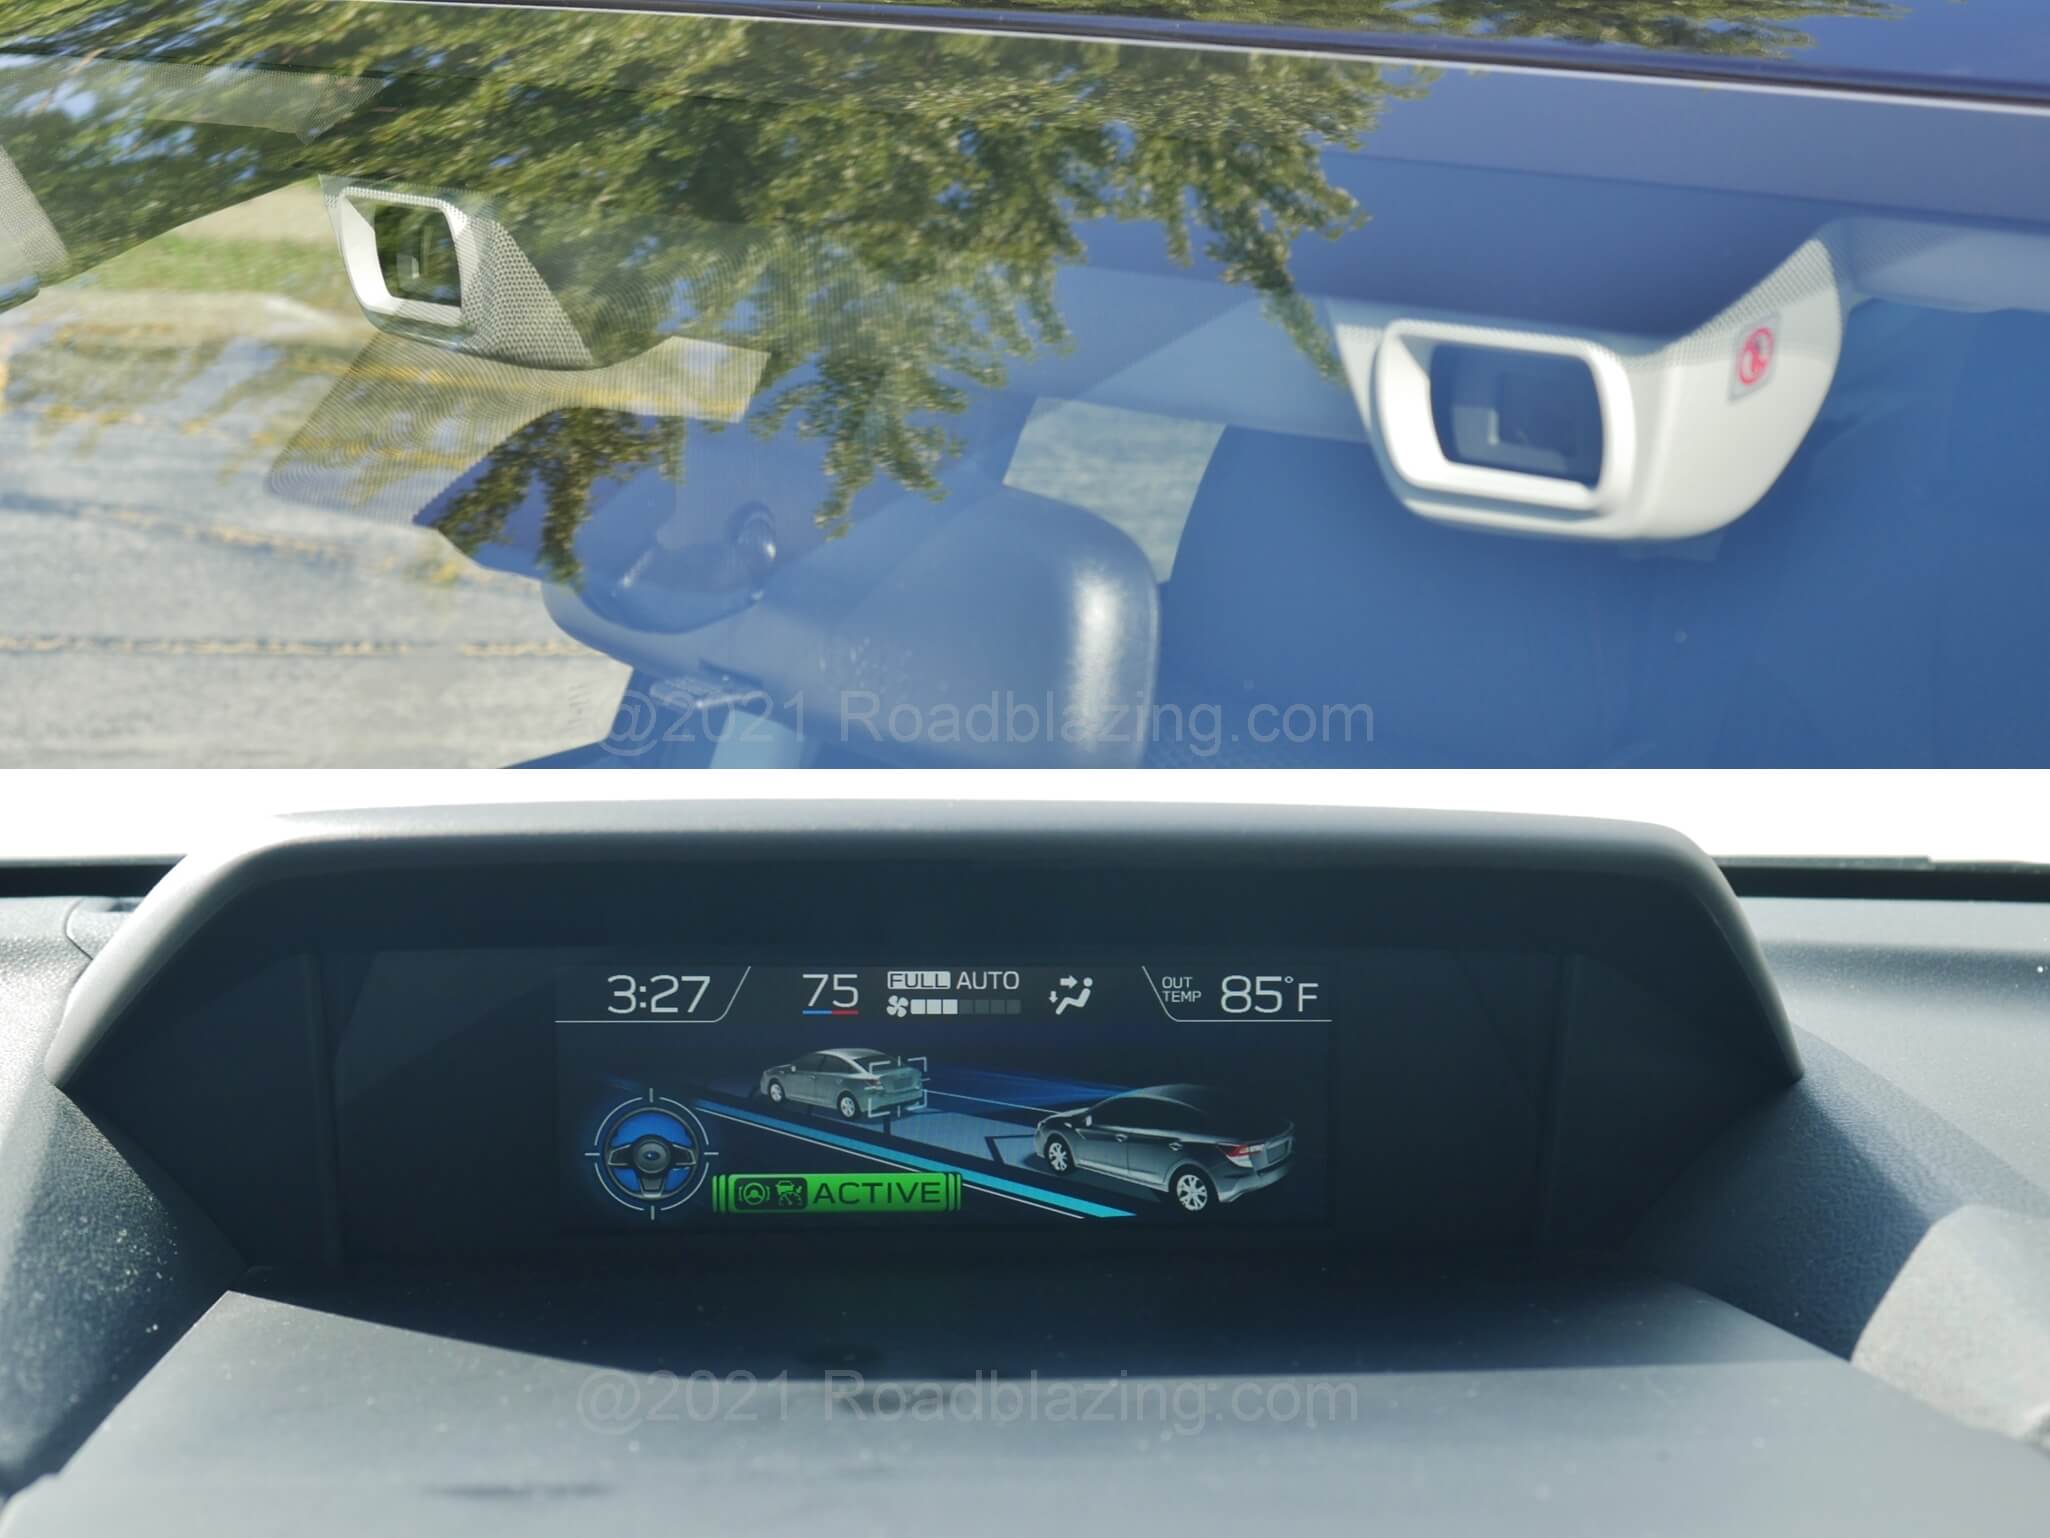 2021 Subaru Forester Sport: standard Eyesight stereoscopic cameras for forward collision avoidance, adaptive cruise control and lane management